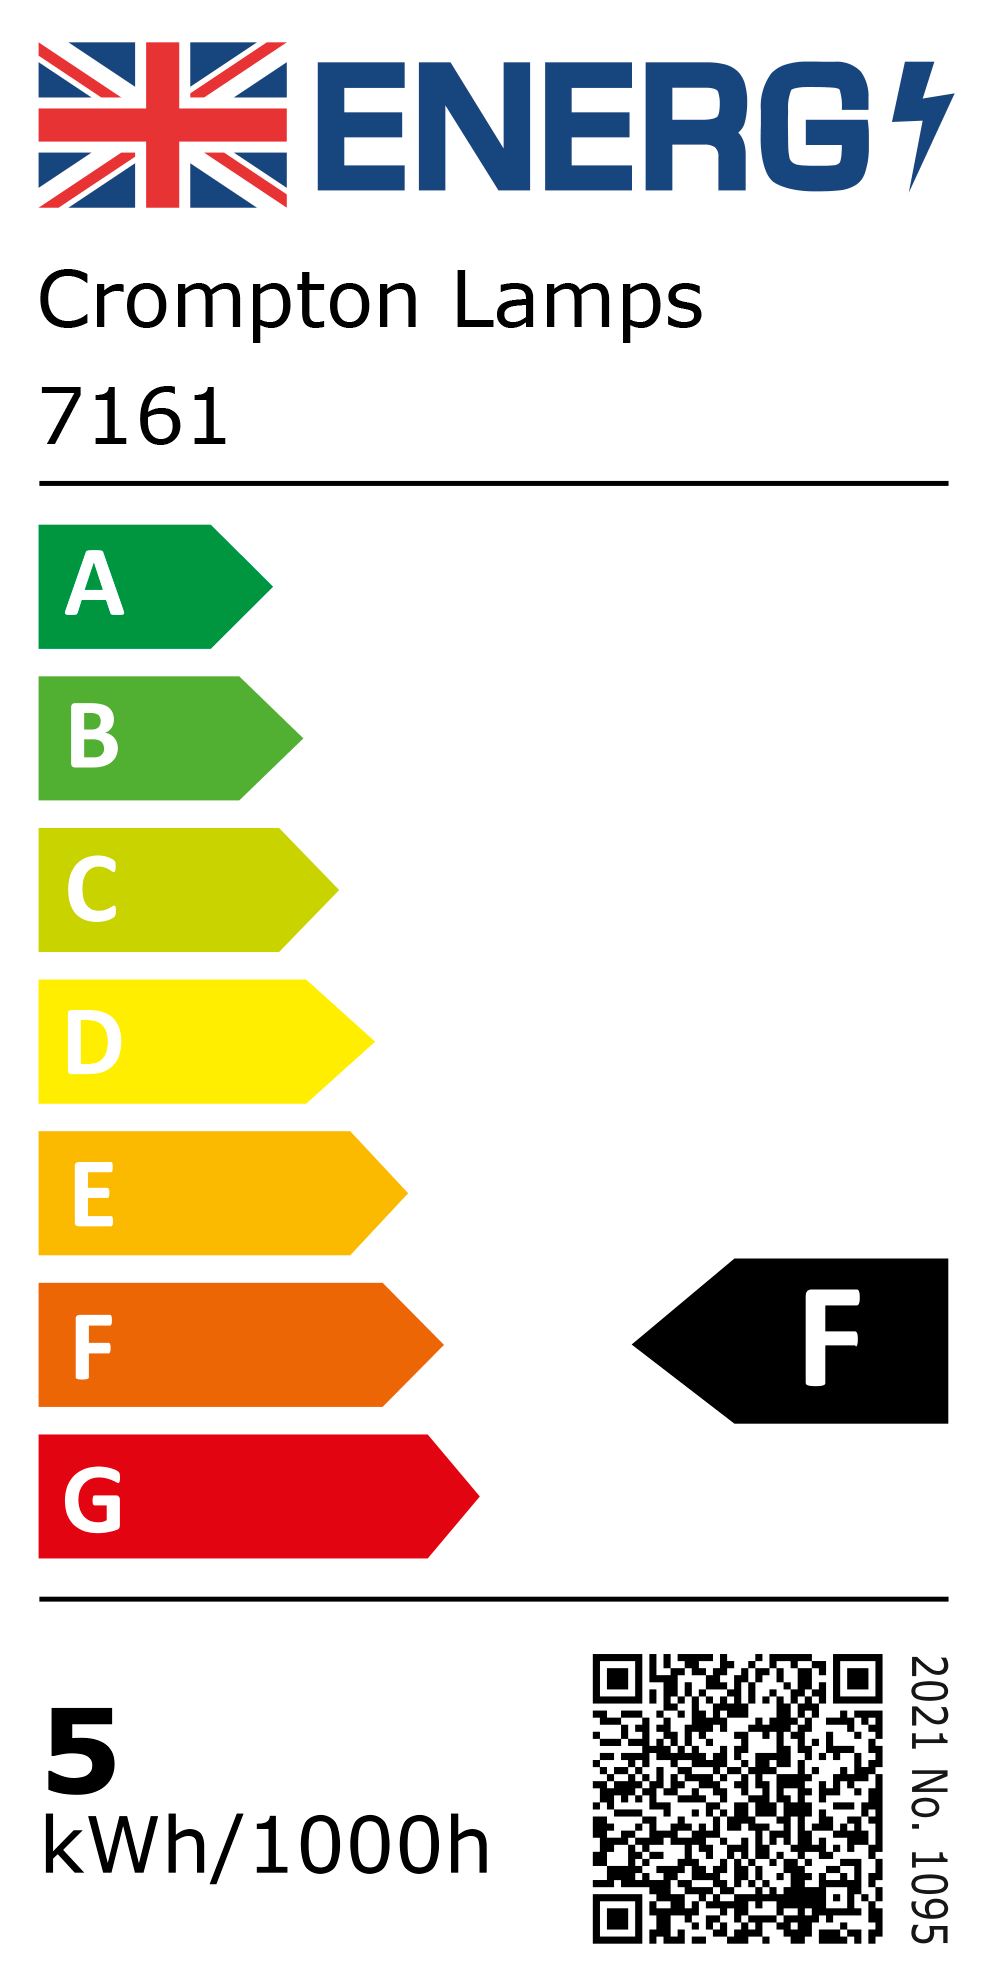 New 2021 Energy Rating Label: Stock Code 7161